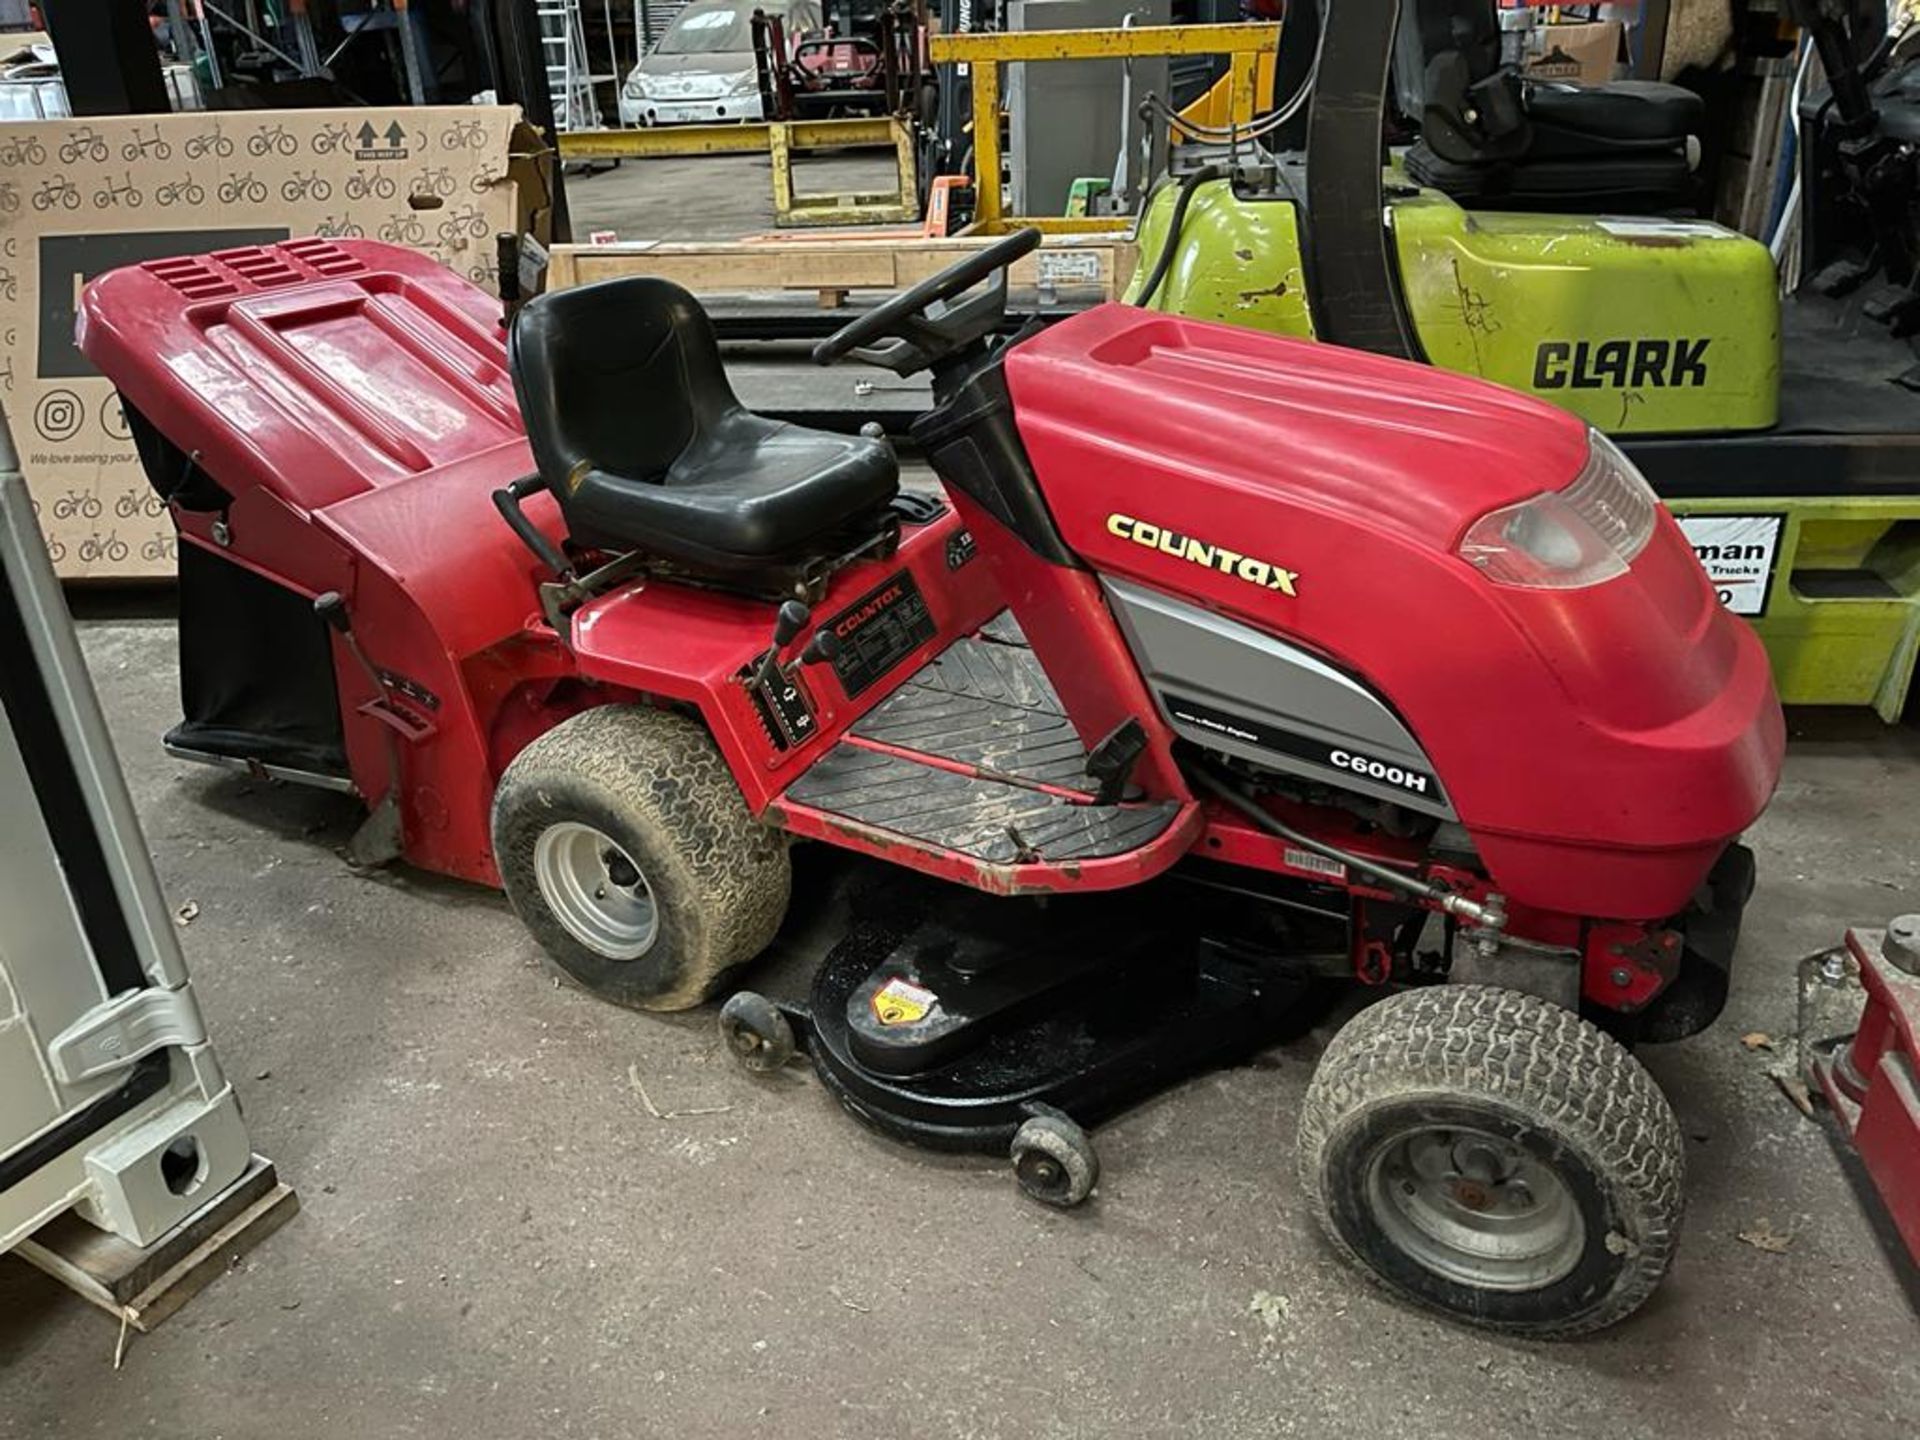 COUNTAX C600H RIDE ON LAWN MOWER, 4 WHEEL DRIVE, CUTS AND COLLECTS *NO VAT*